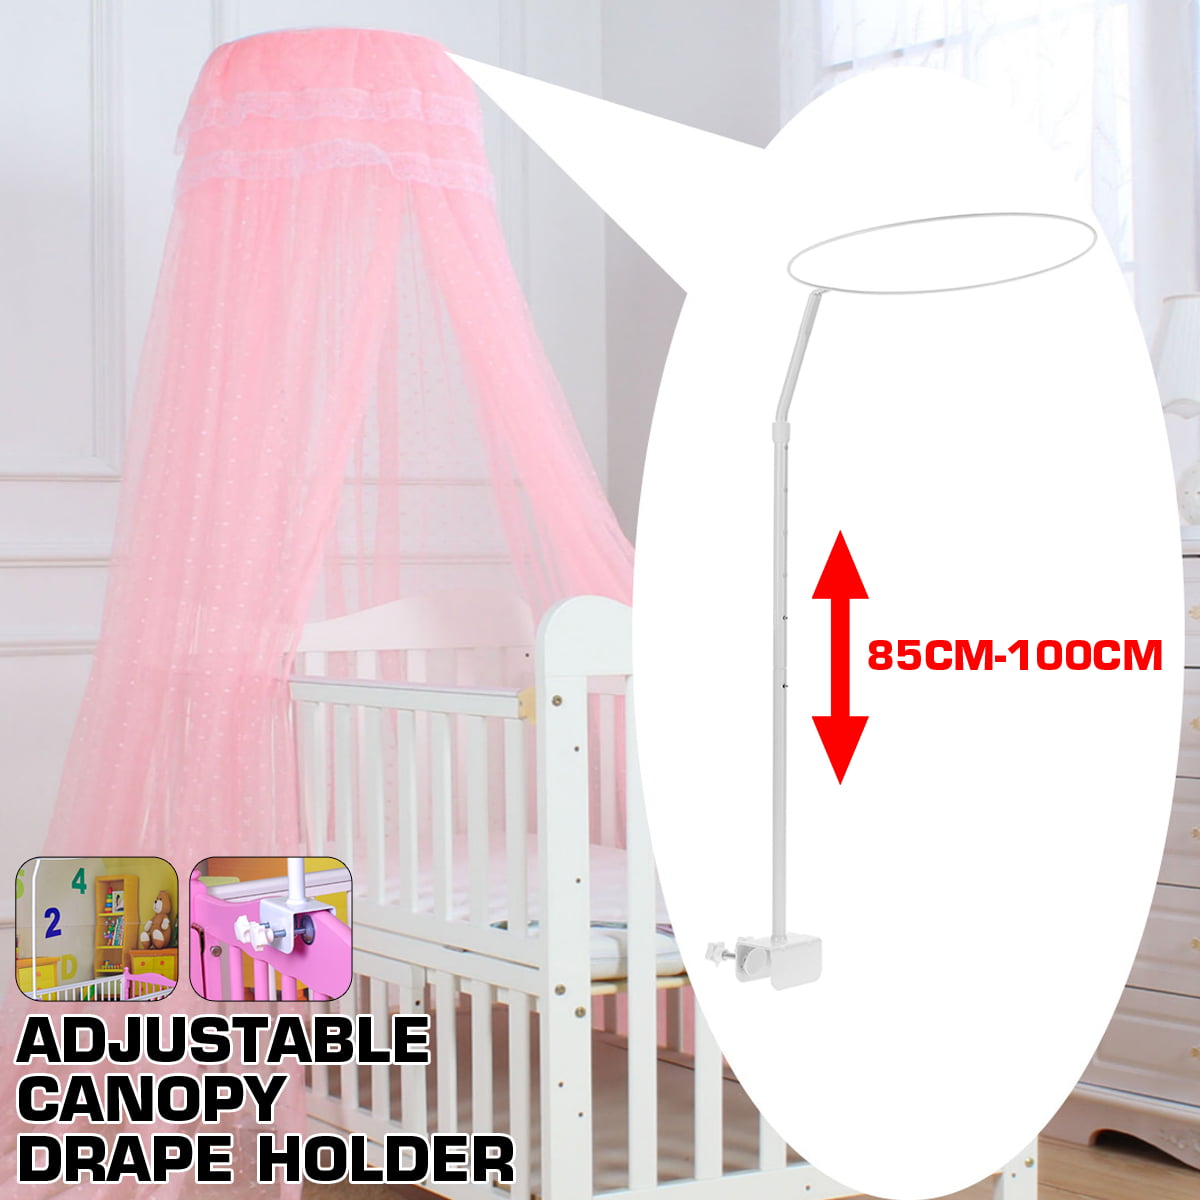 LUXURY BABY CANOPY HOLDER FOR COT/ COT BED PINK DRAPE